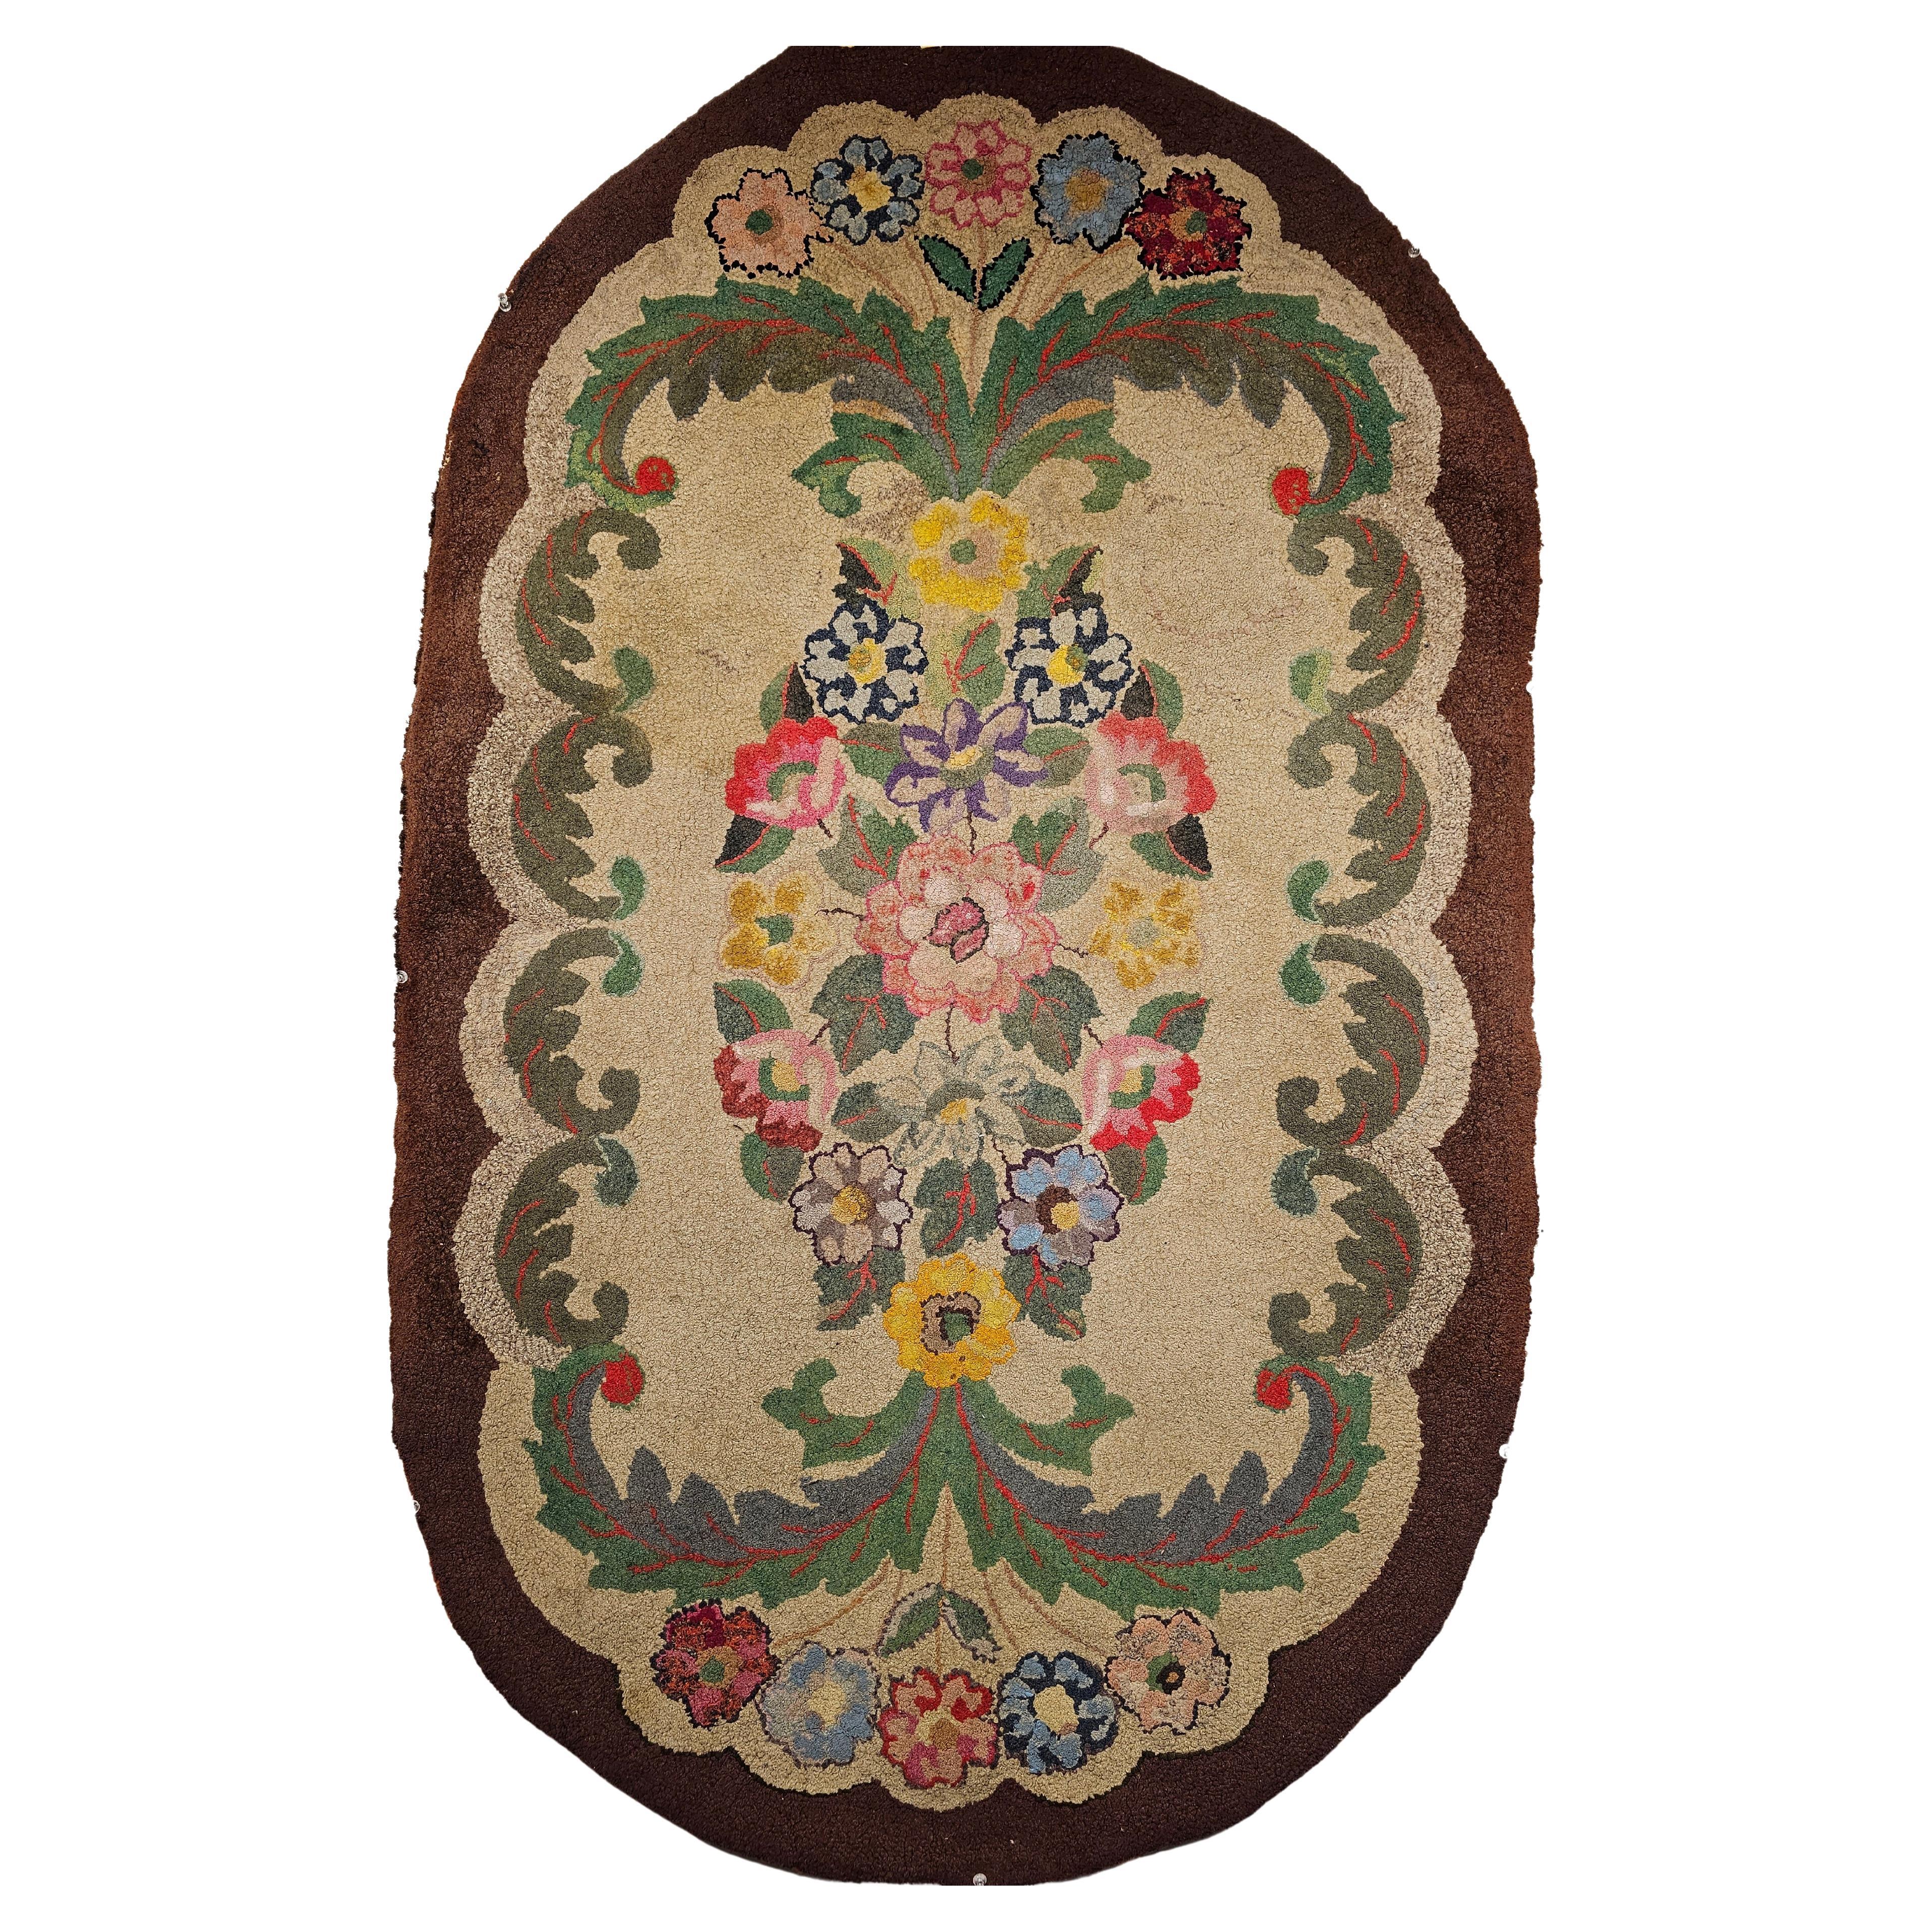 Vintage American hand hooked rug was handcrafted in the early 1900s in the New England Area of the United States.  It has a floral pattern with flowers in brilliant vintage colors including ivory, green, blue, and red.  The Antique Hooked Rugs are a